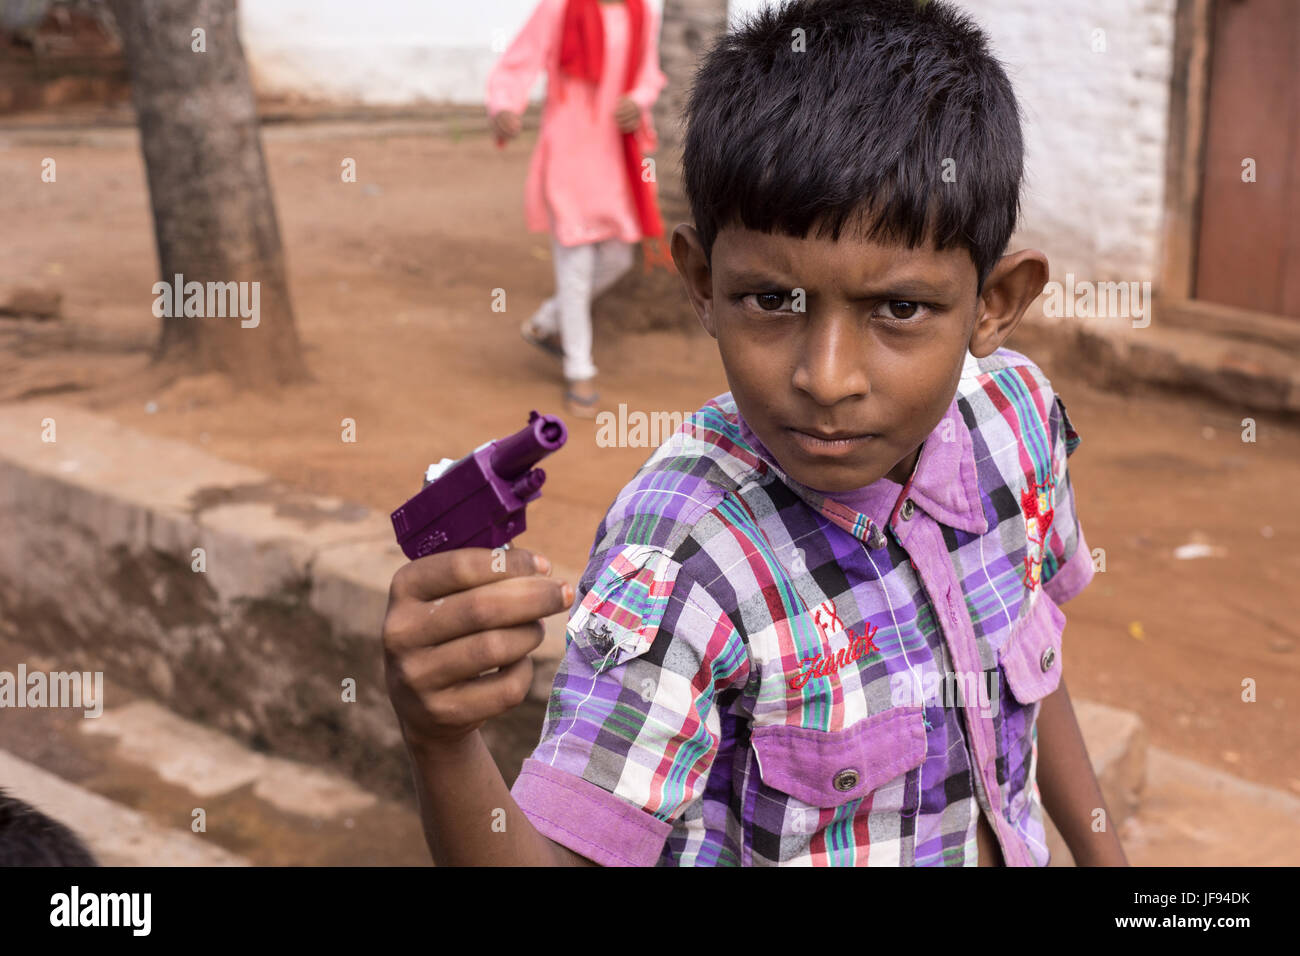 Mysore, India - October 27, 2013: Closeup of preteen boy looks threatening and pretends to kill with his purple toy gun in Mellahalli hamlet. Stock Photo